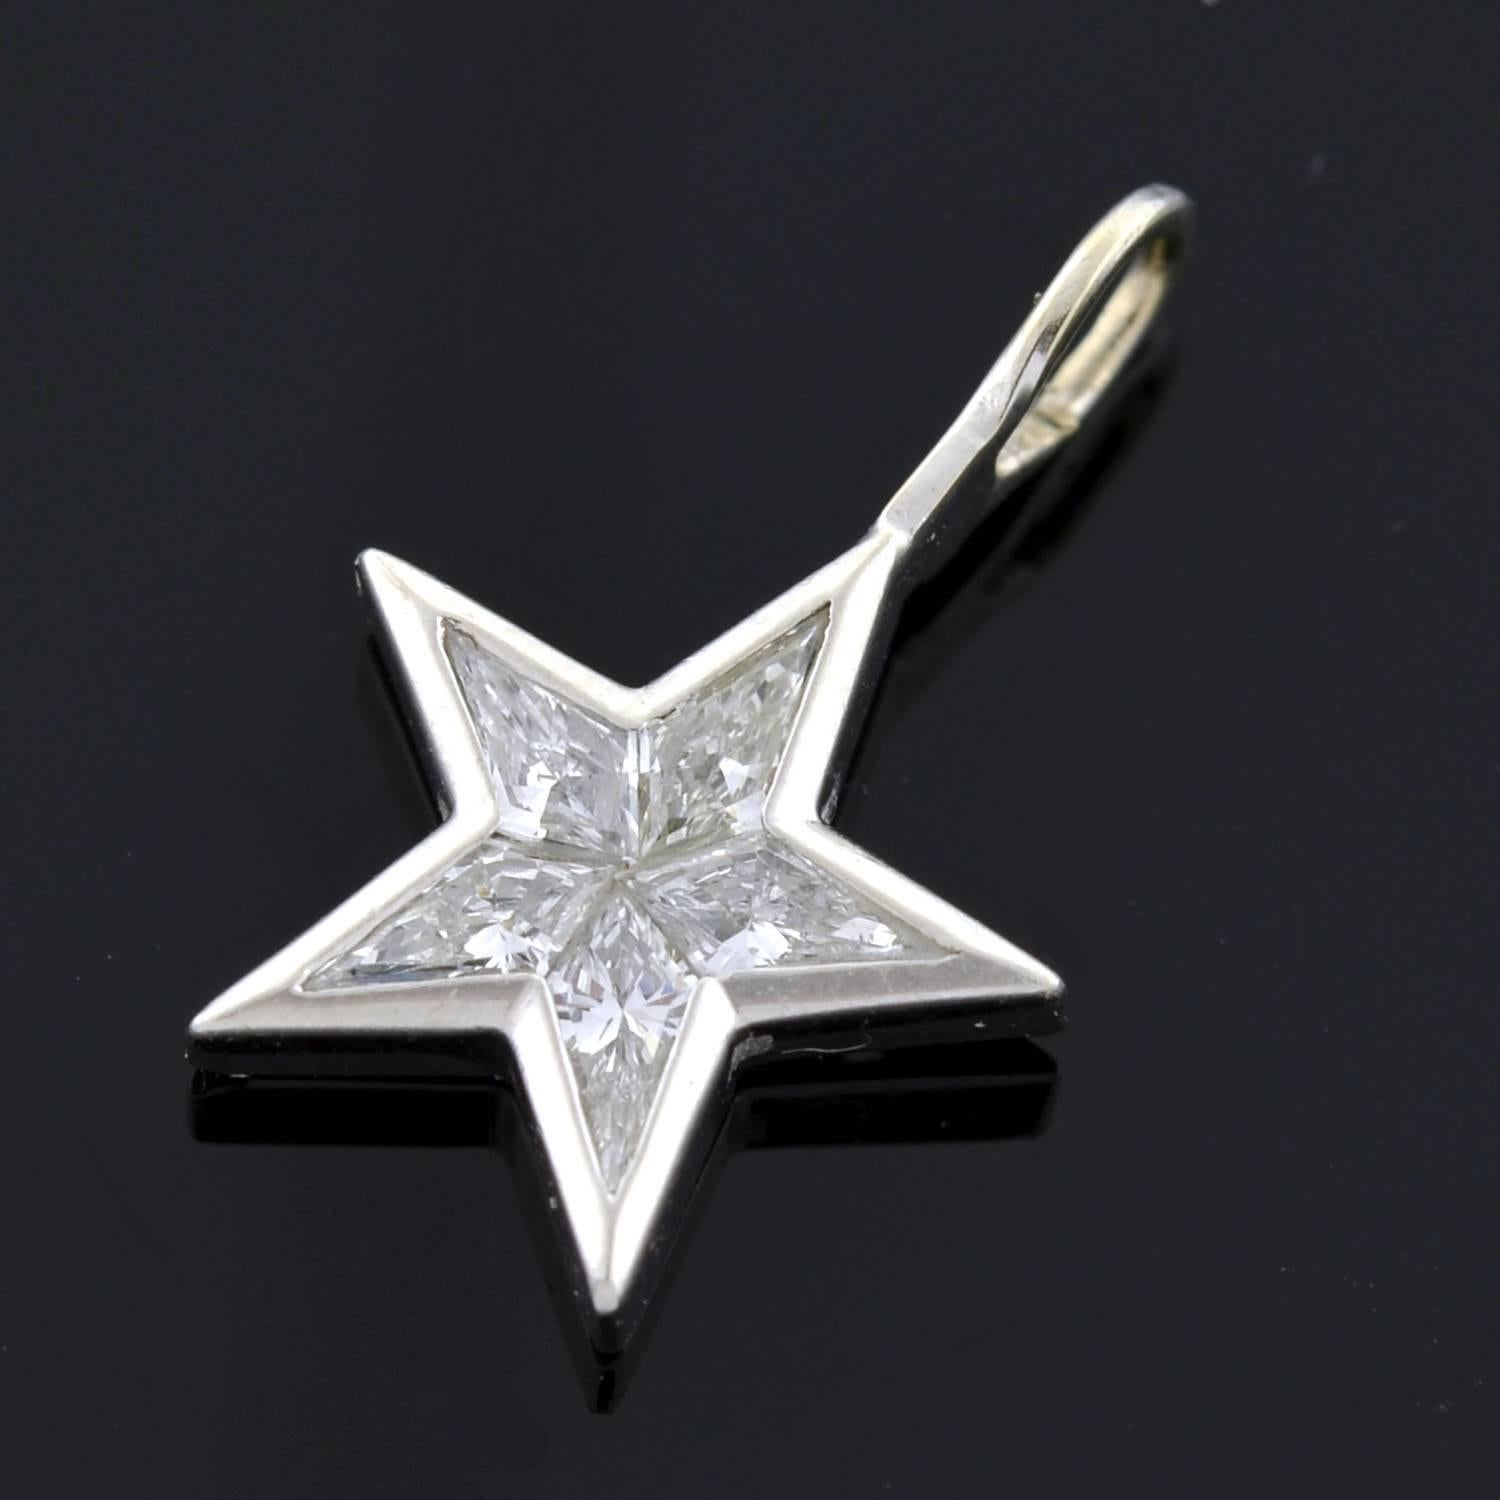 A beautiful Estate diamond star pendant! Made of platinum, this lovely piece is comprised of 5 Kite Cut diamonds, which fit together perfectly to form the shape of a 5-point star. The diamonds are invisibly set, giving the illusion that the star is